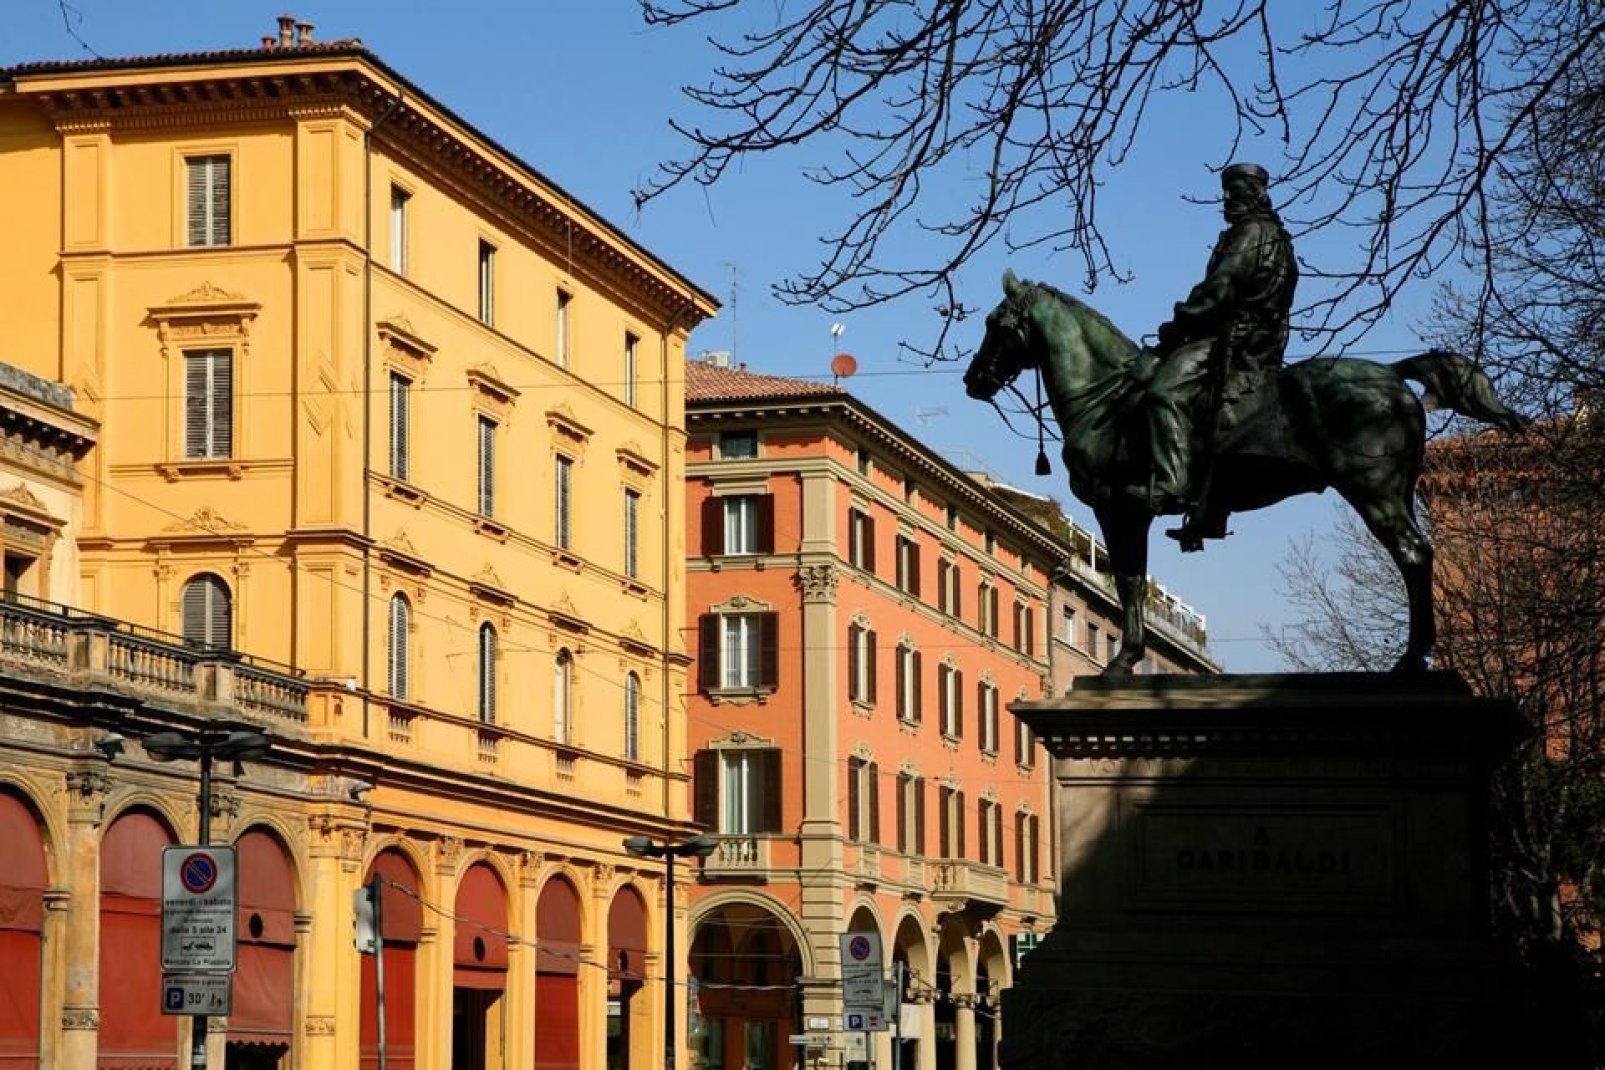 Bologna is nicknamed 'the Red' due to the reddish colour of its buildings and because the city has always leaned towards the political left